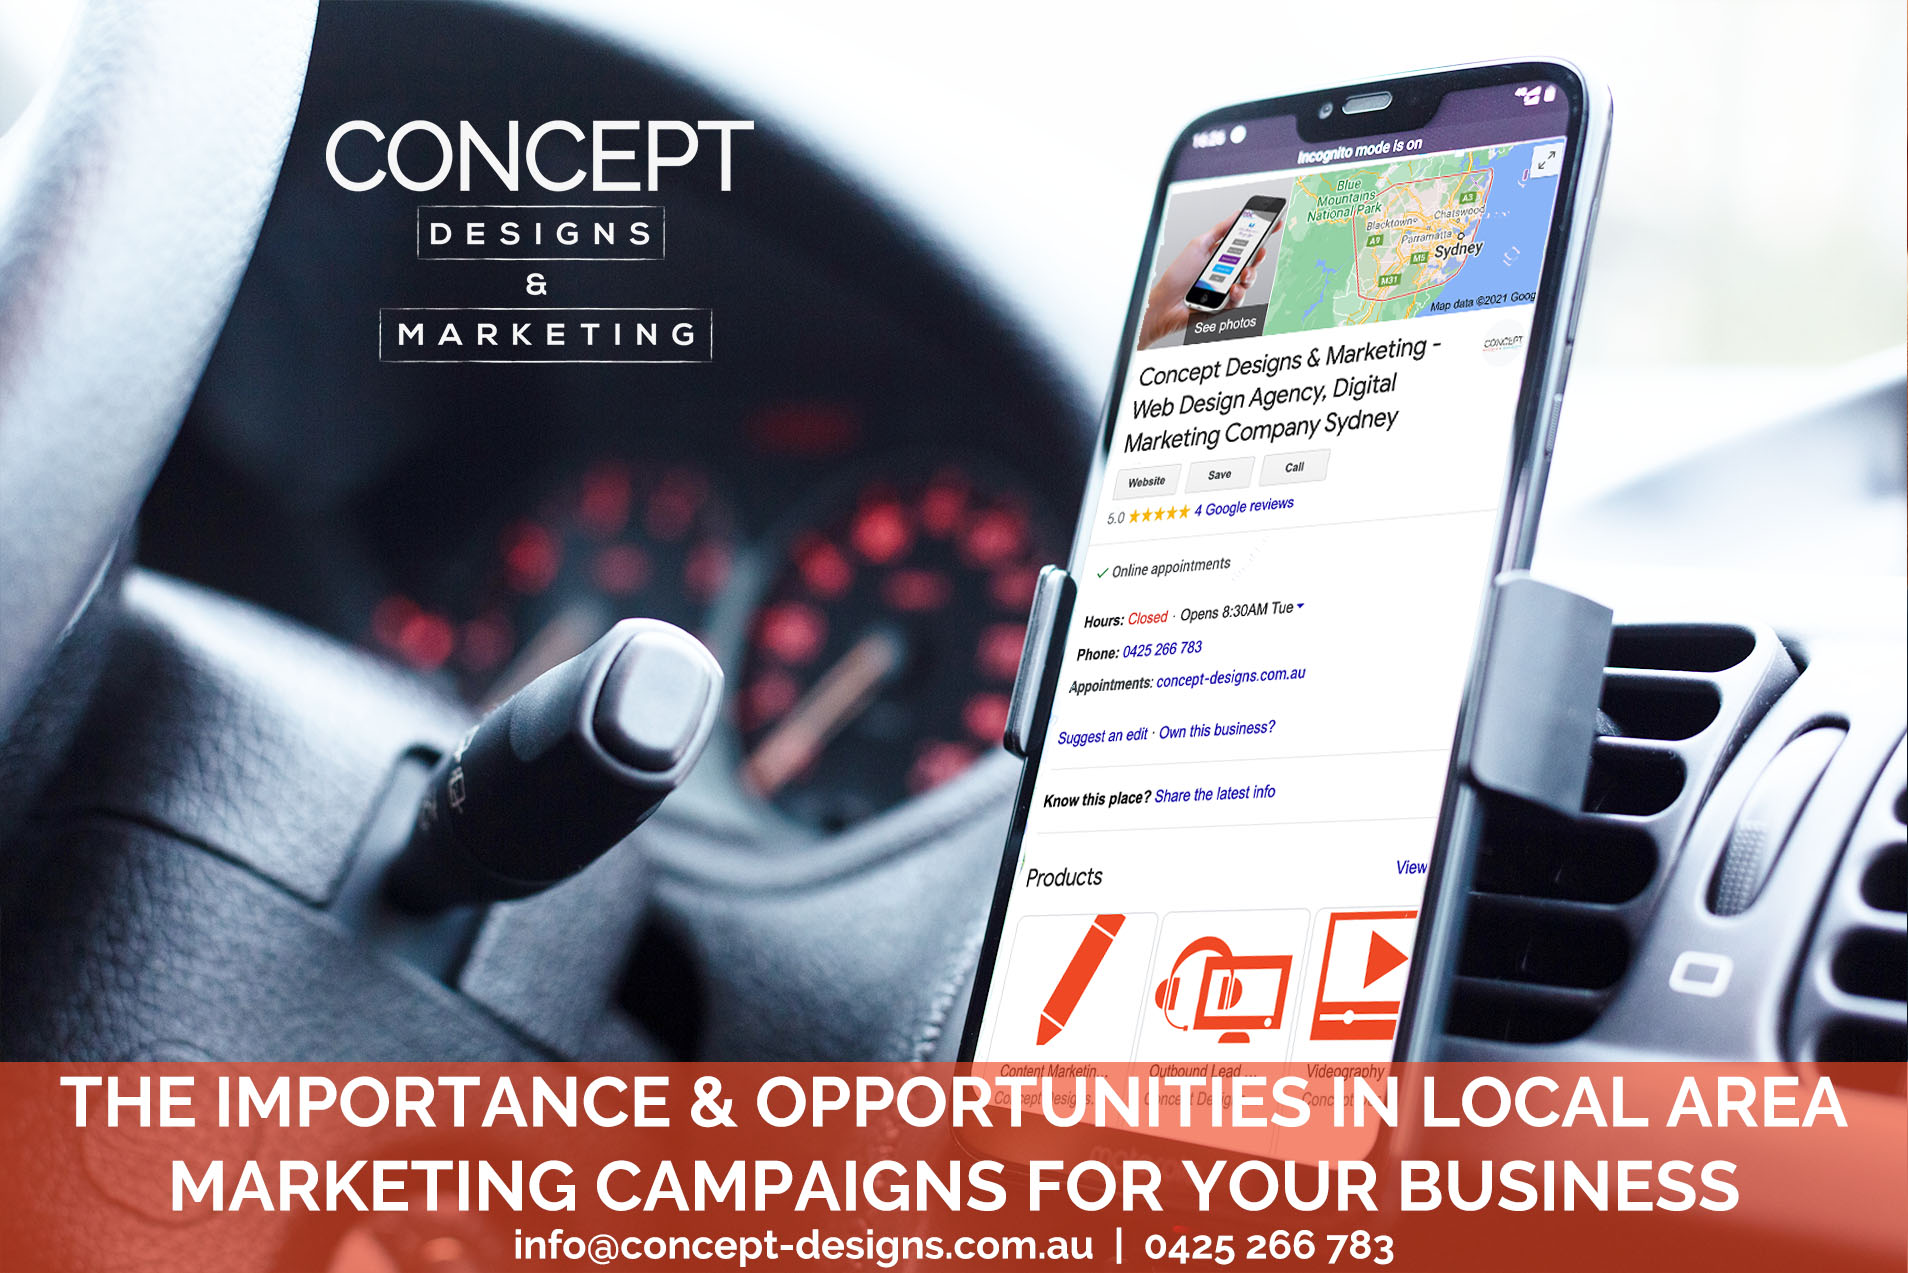 The Importance <span class="amp">&</span> Opportunities in Local Area Marketing Campaigns  for Your Business